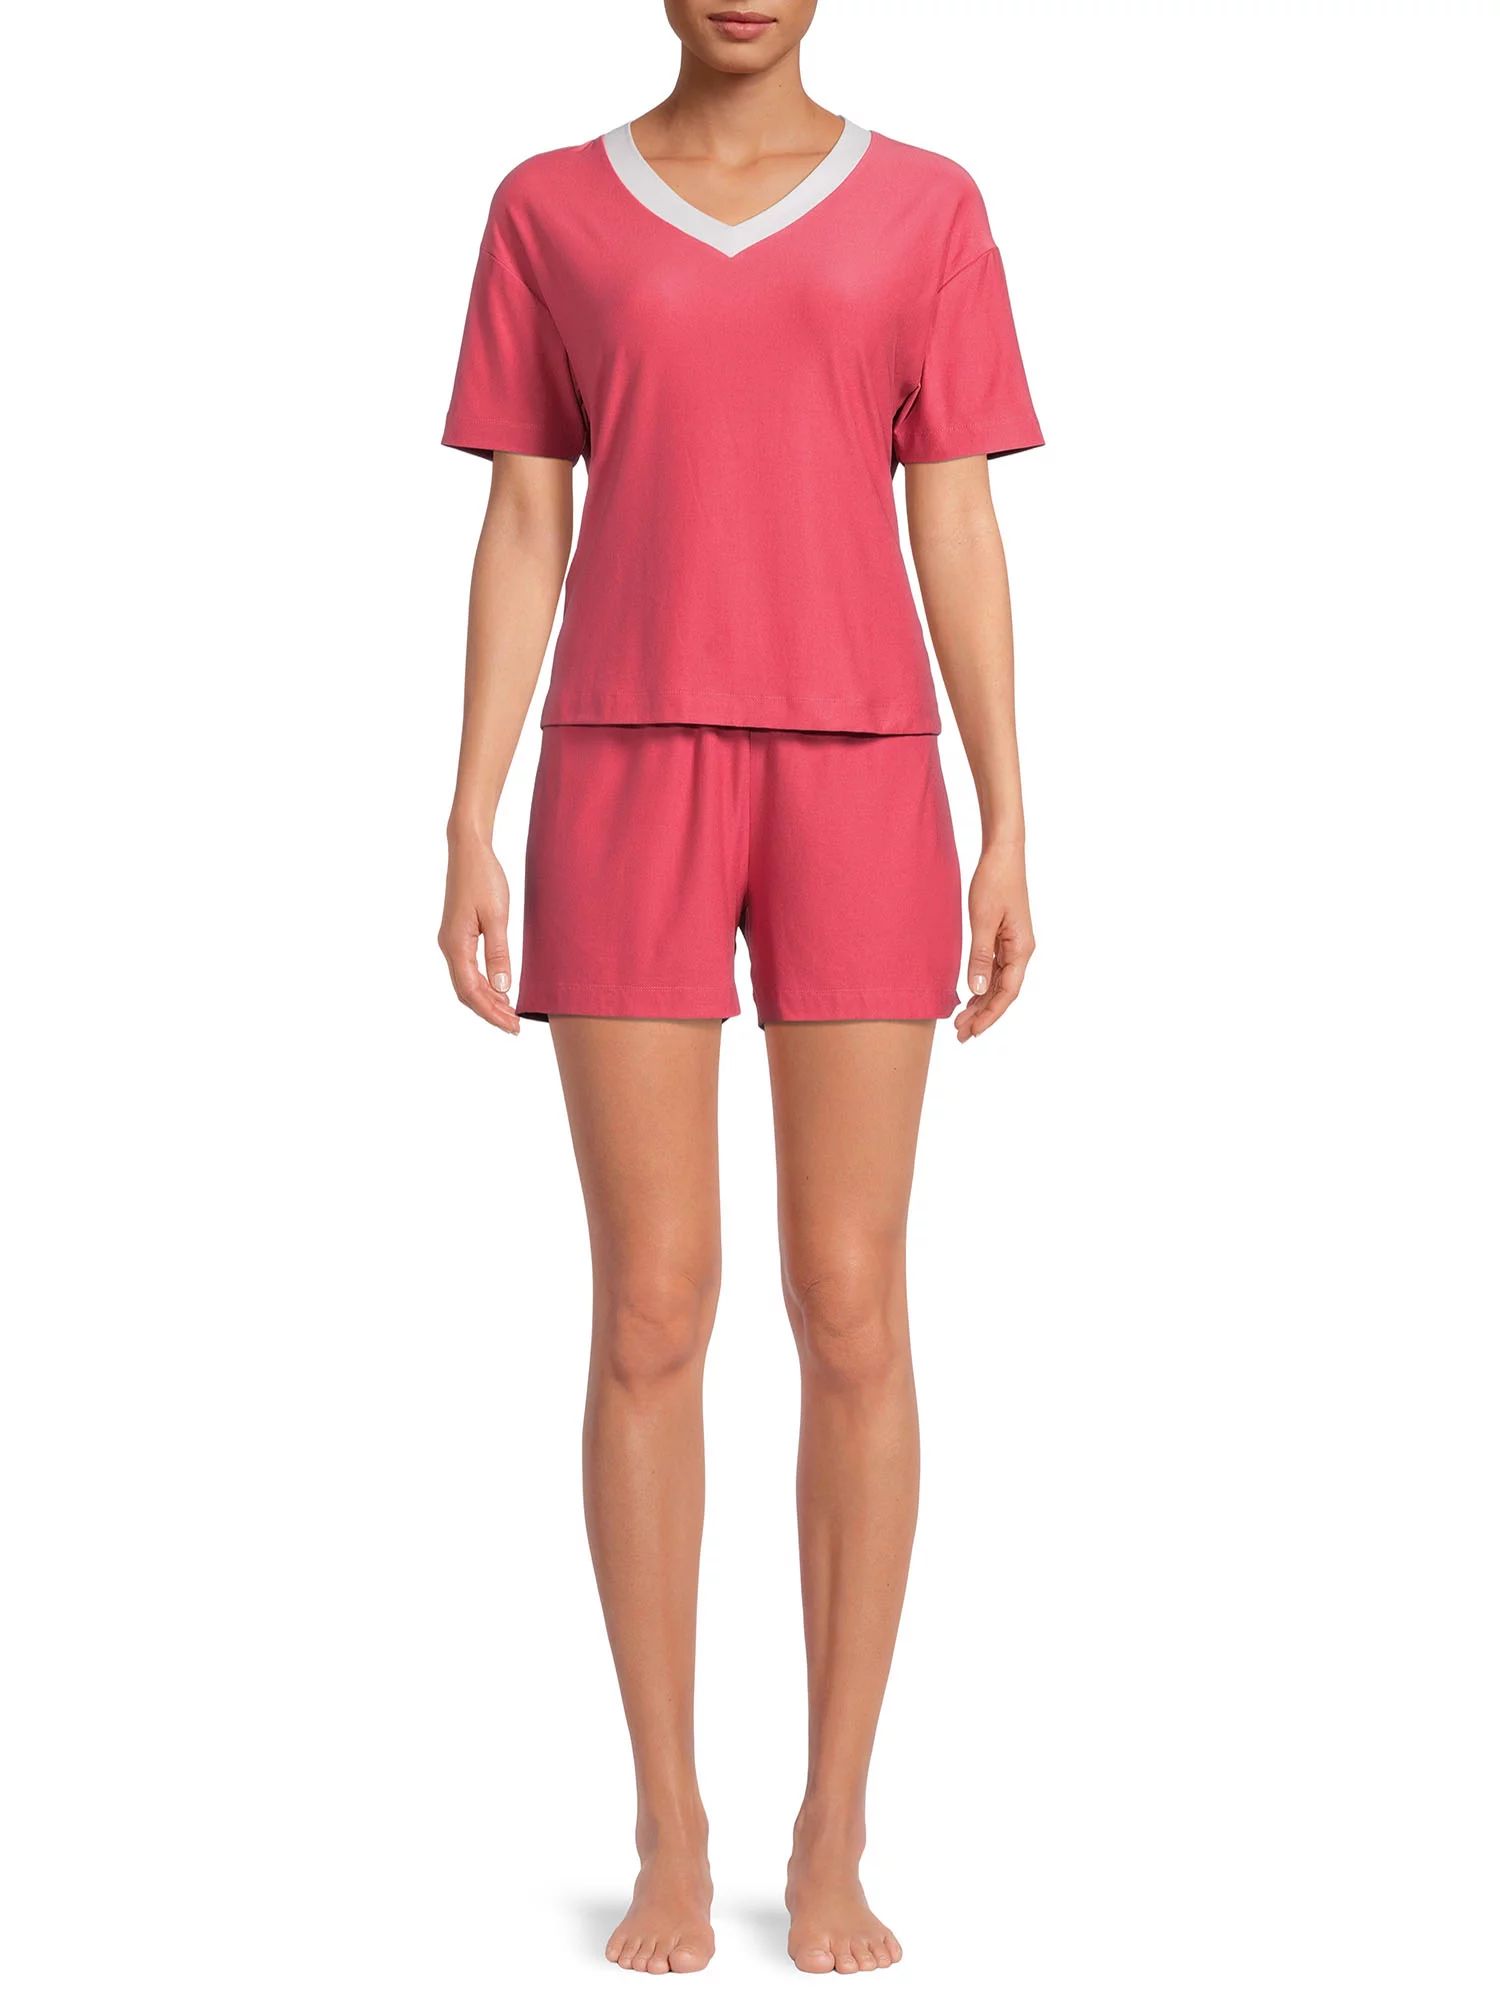 Lissome Women's and Women's Plus Short Sleeve V-Neck Top and Short Set, 2-Piece | Walmart (US)